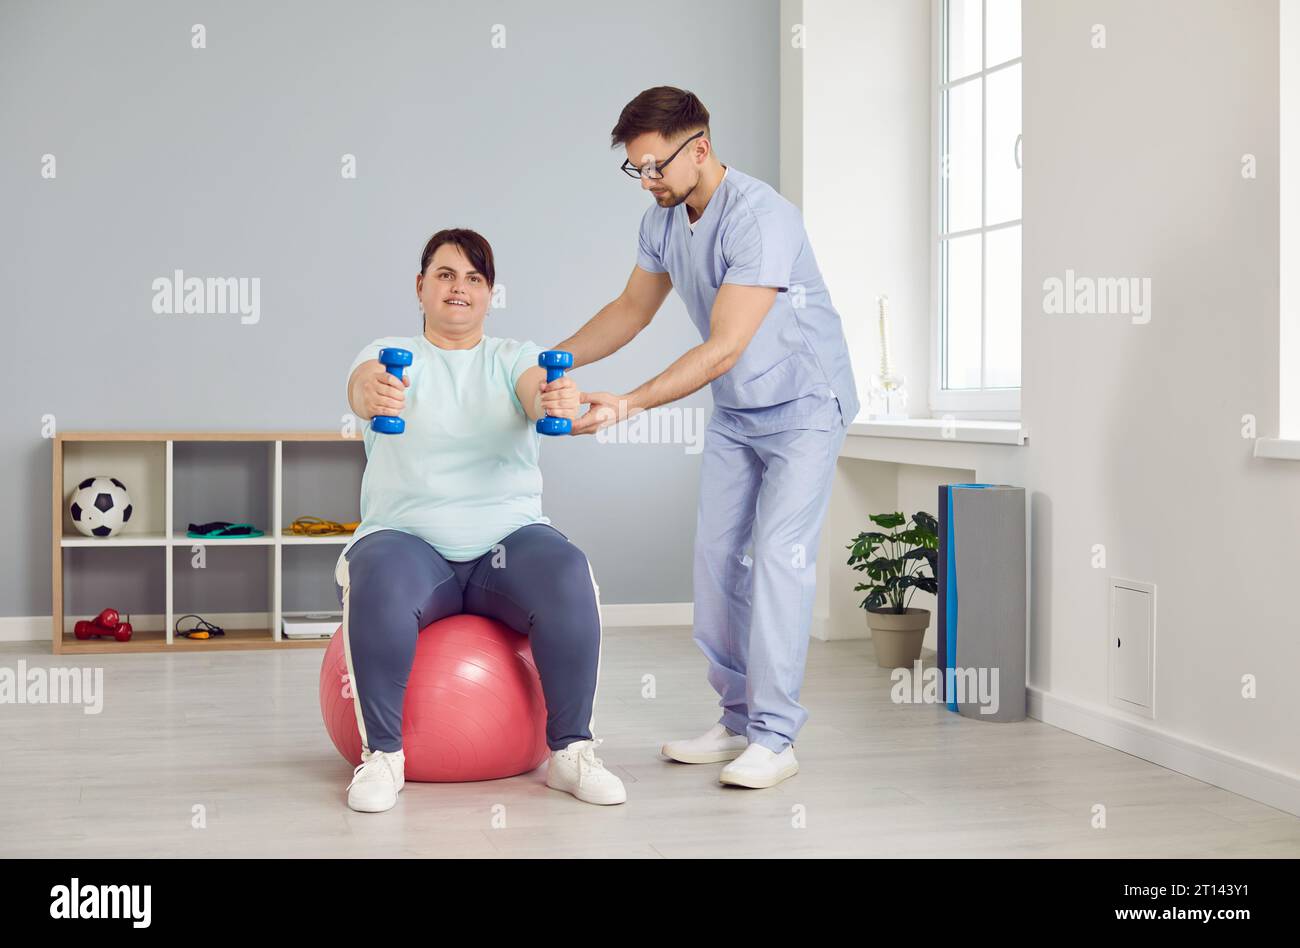 Fat young woman doing sport exercise using dumbbells with support from a male nurse. Stock Photo